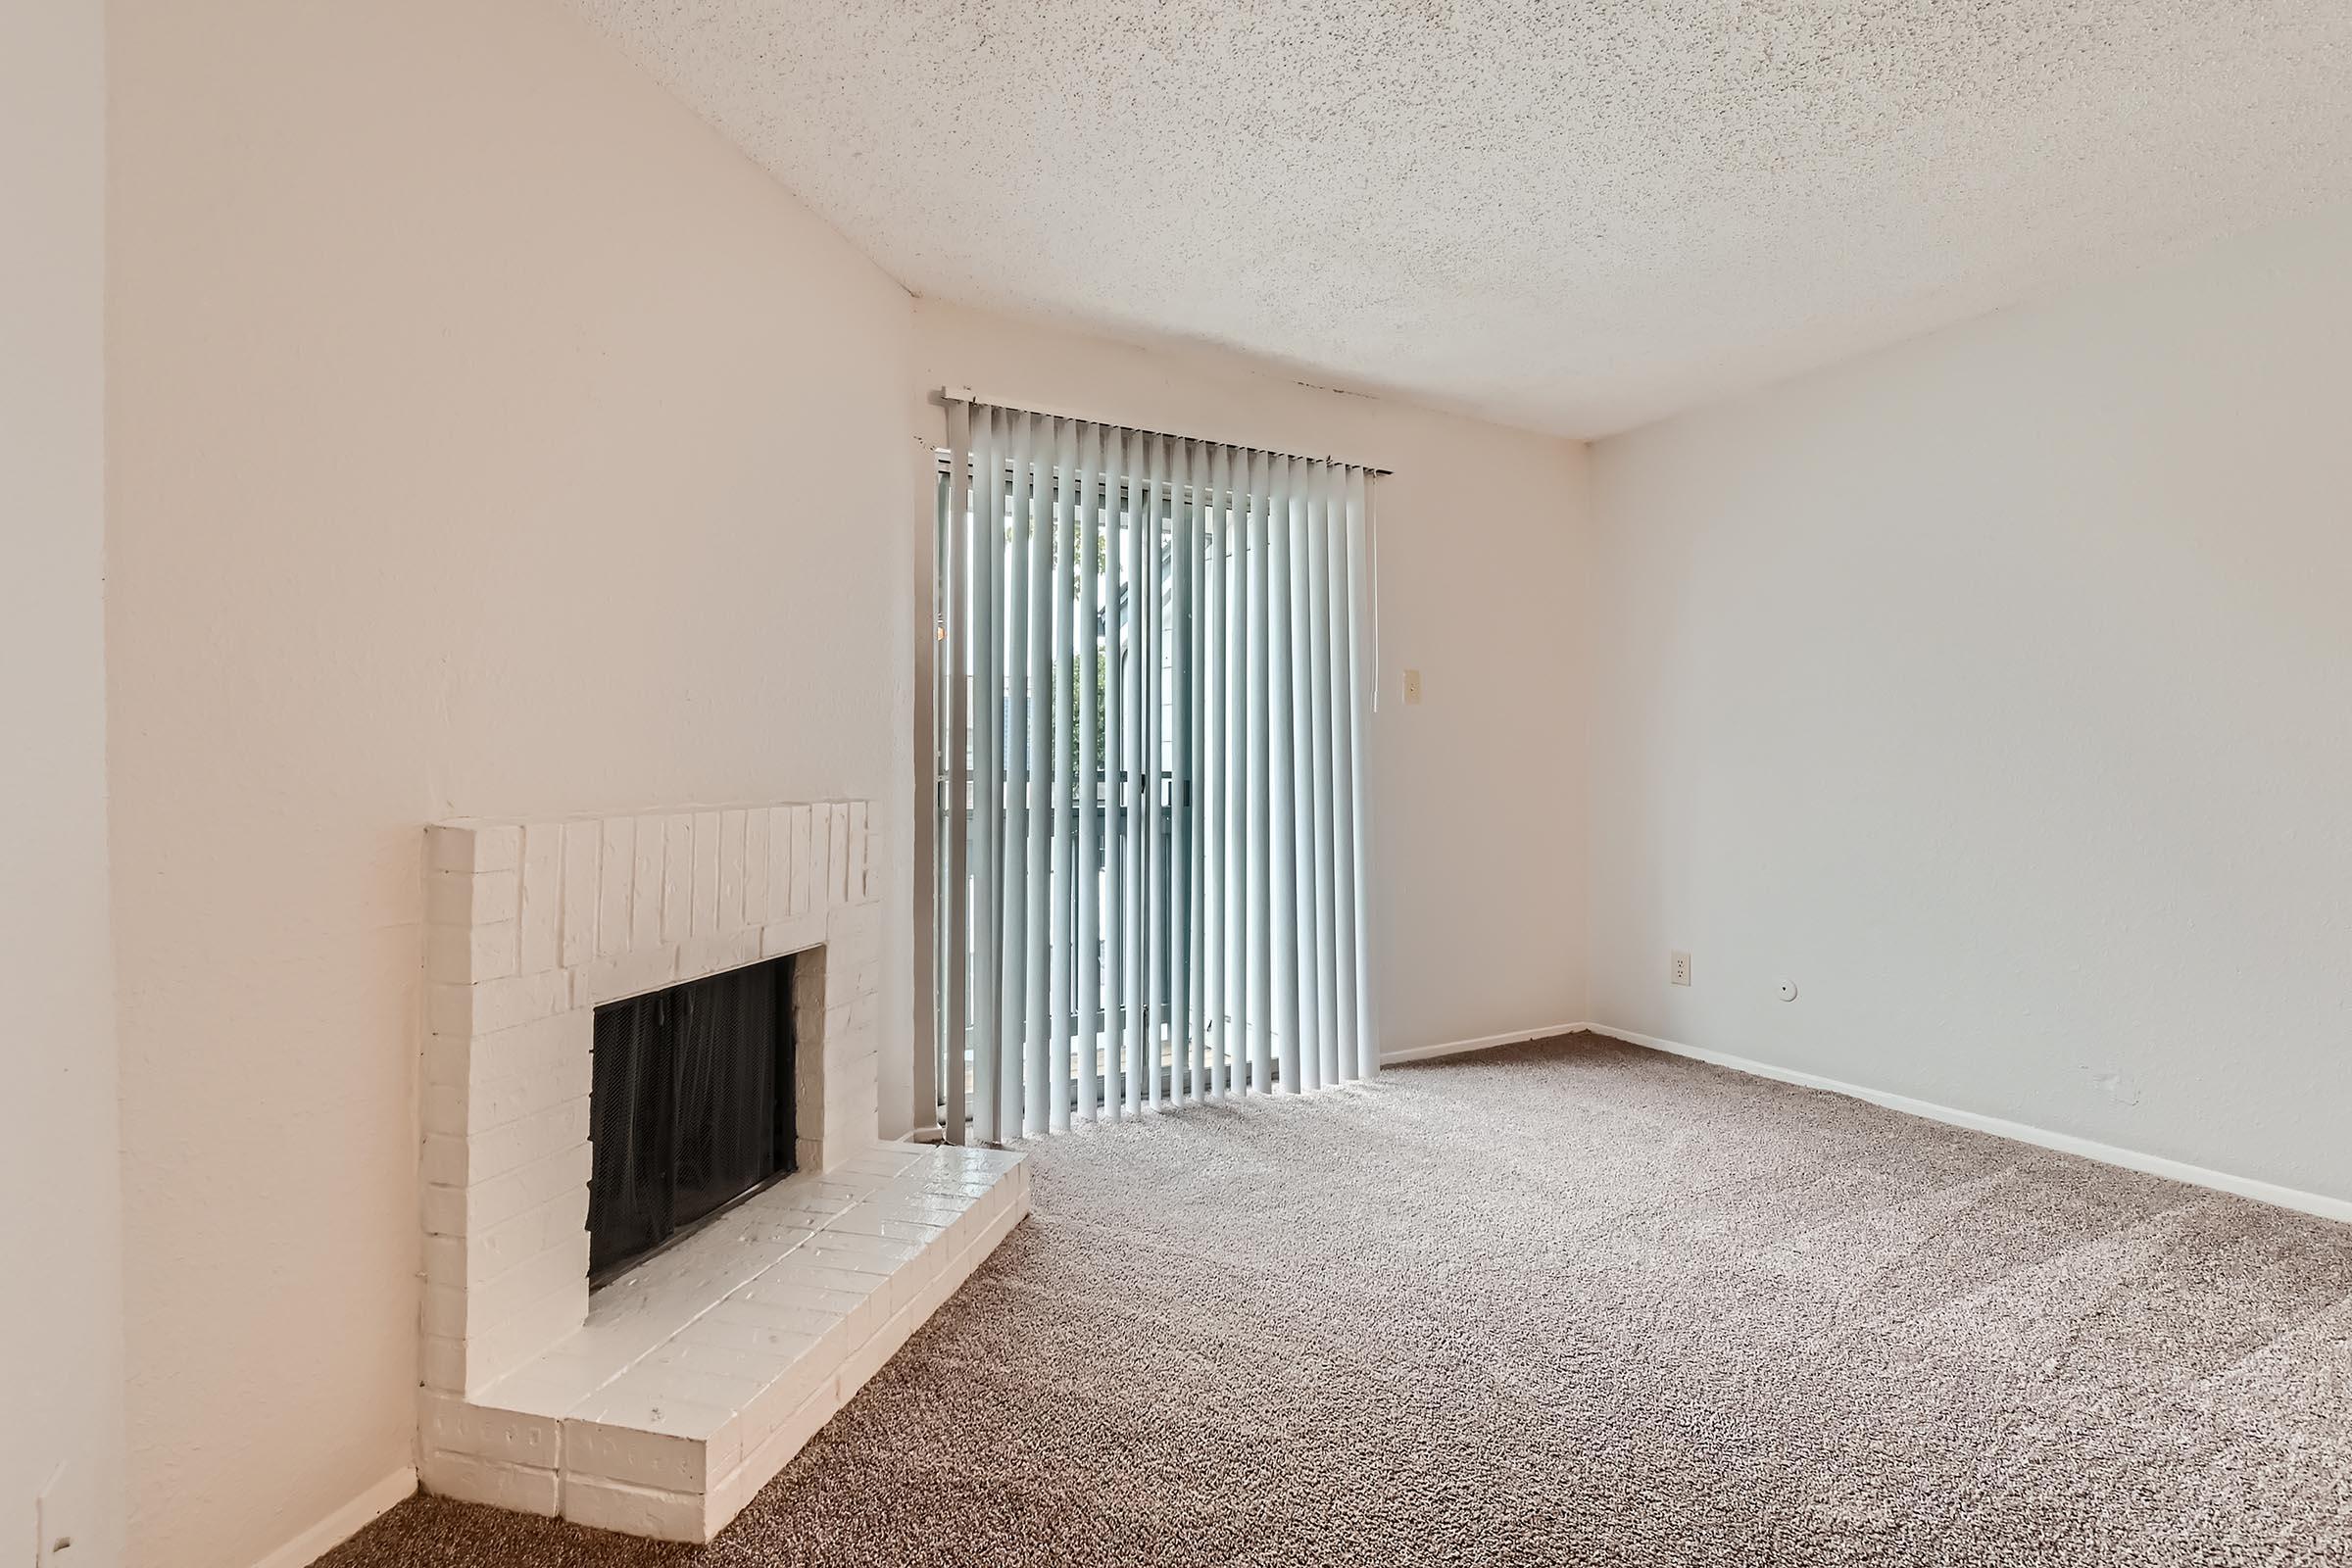 An apartment living room with carpeting, a fireplace and glass doors leading to a balcony at Rise North Arlington.